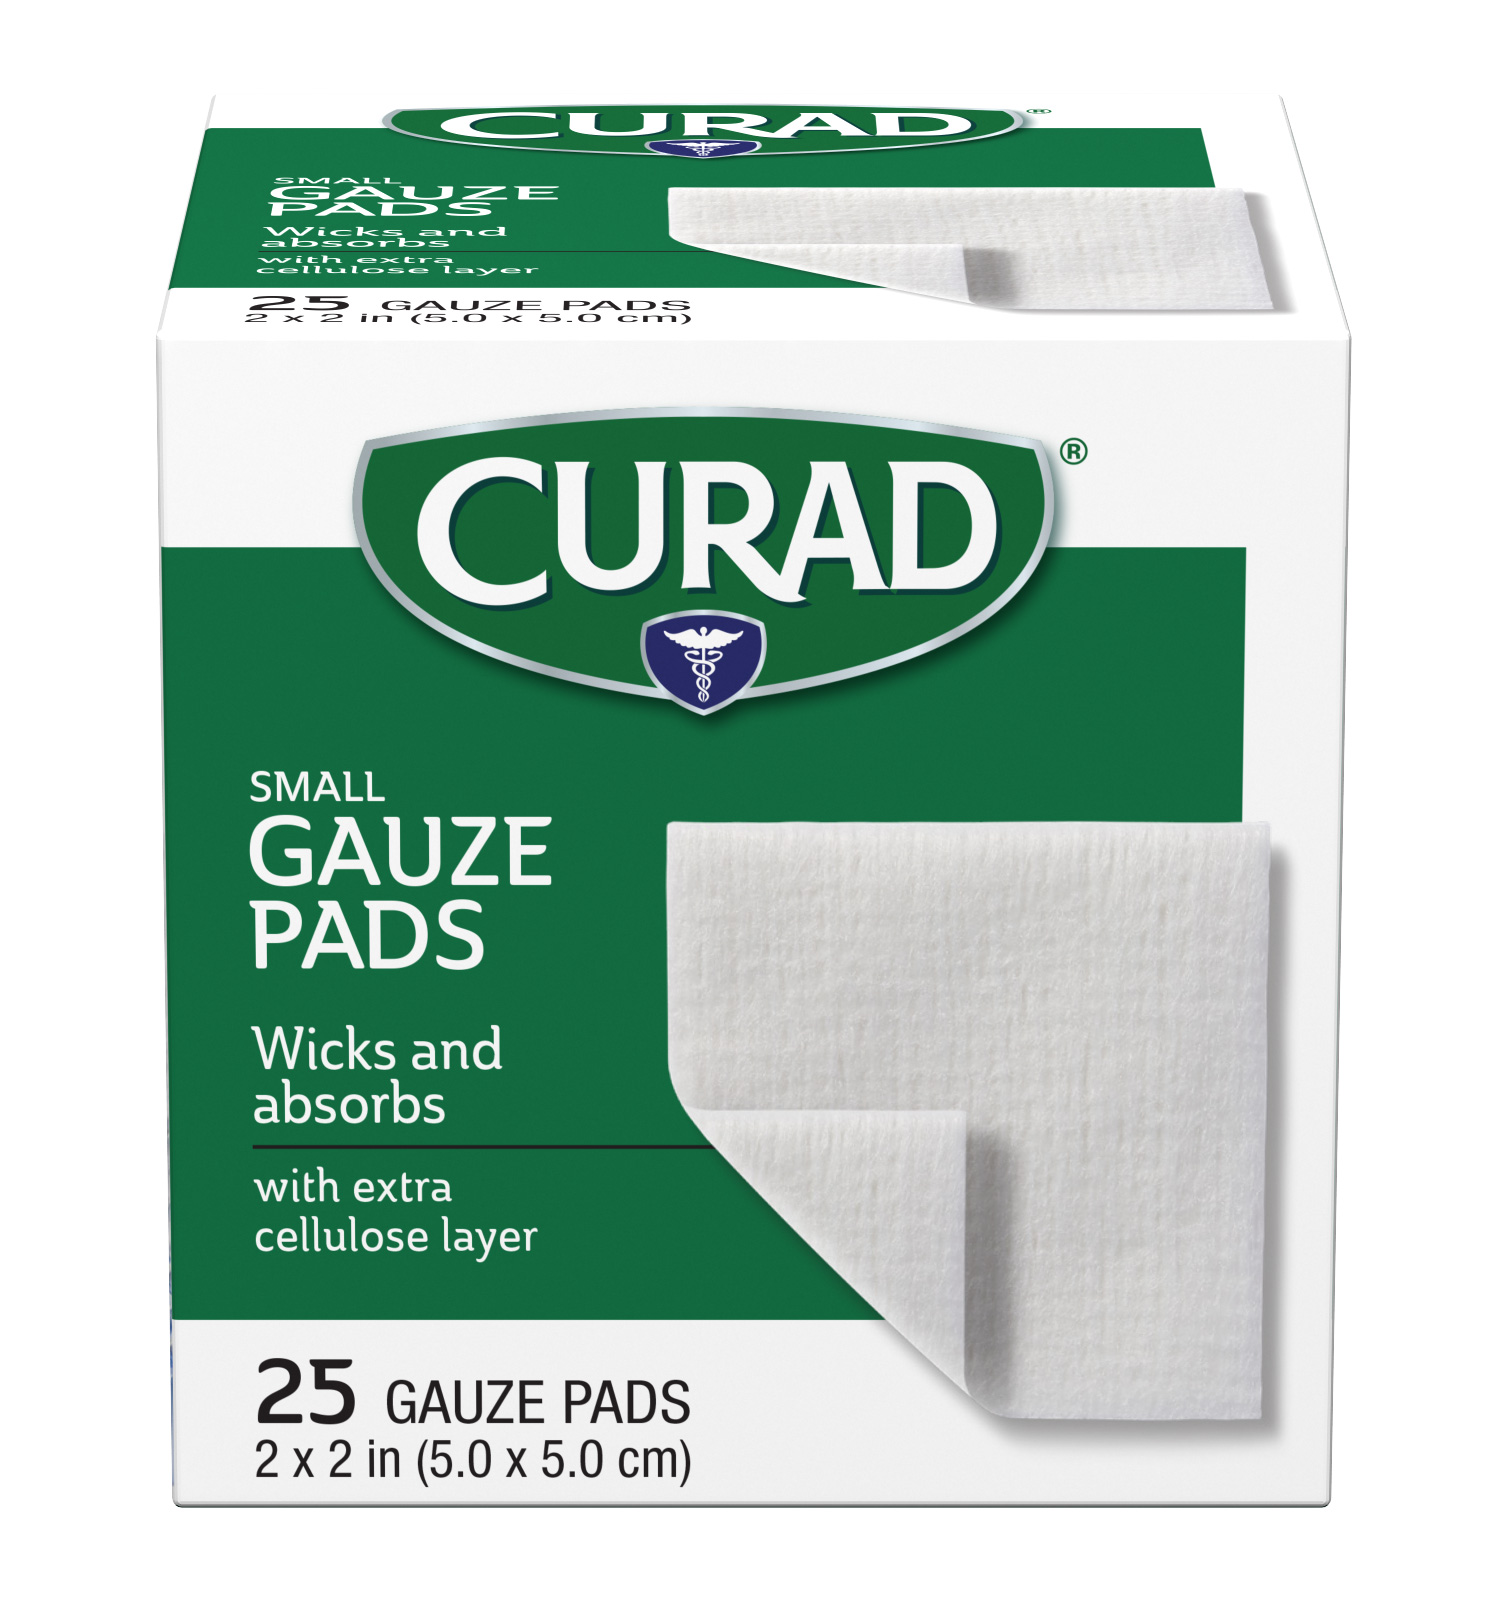 Small Gauze Pads, 2 x 2, 25 count